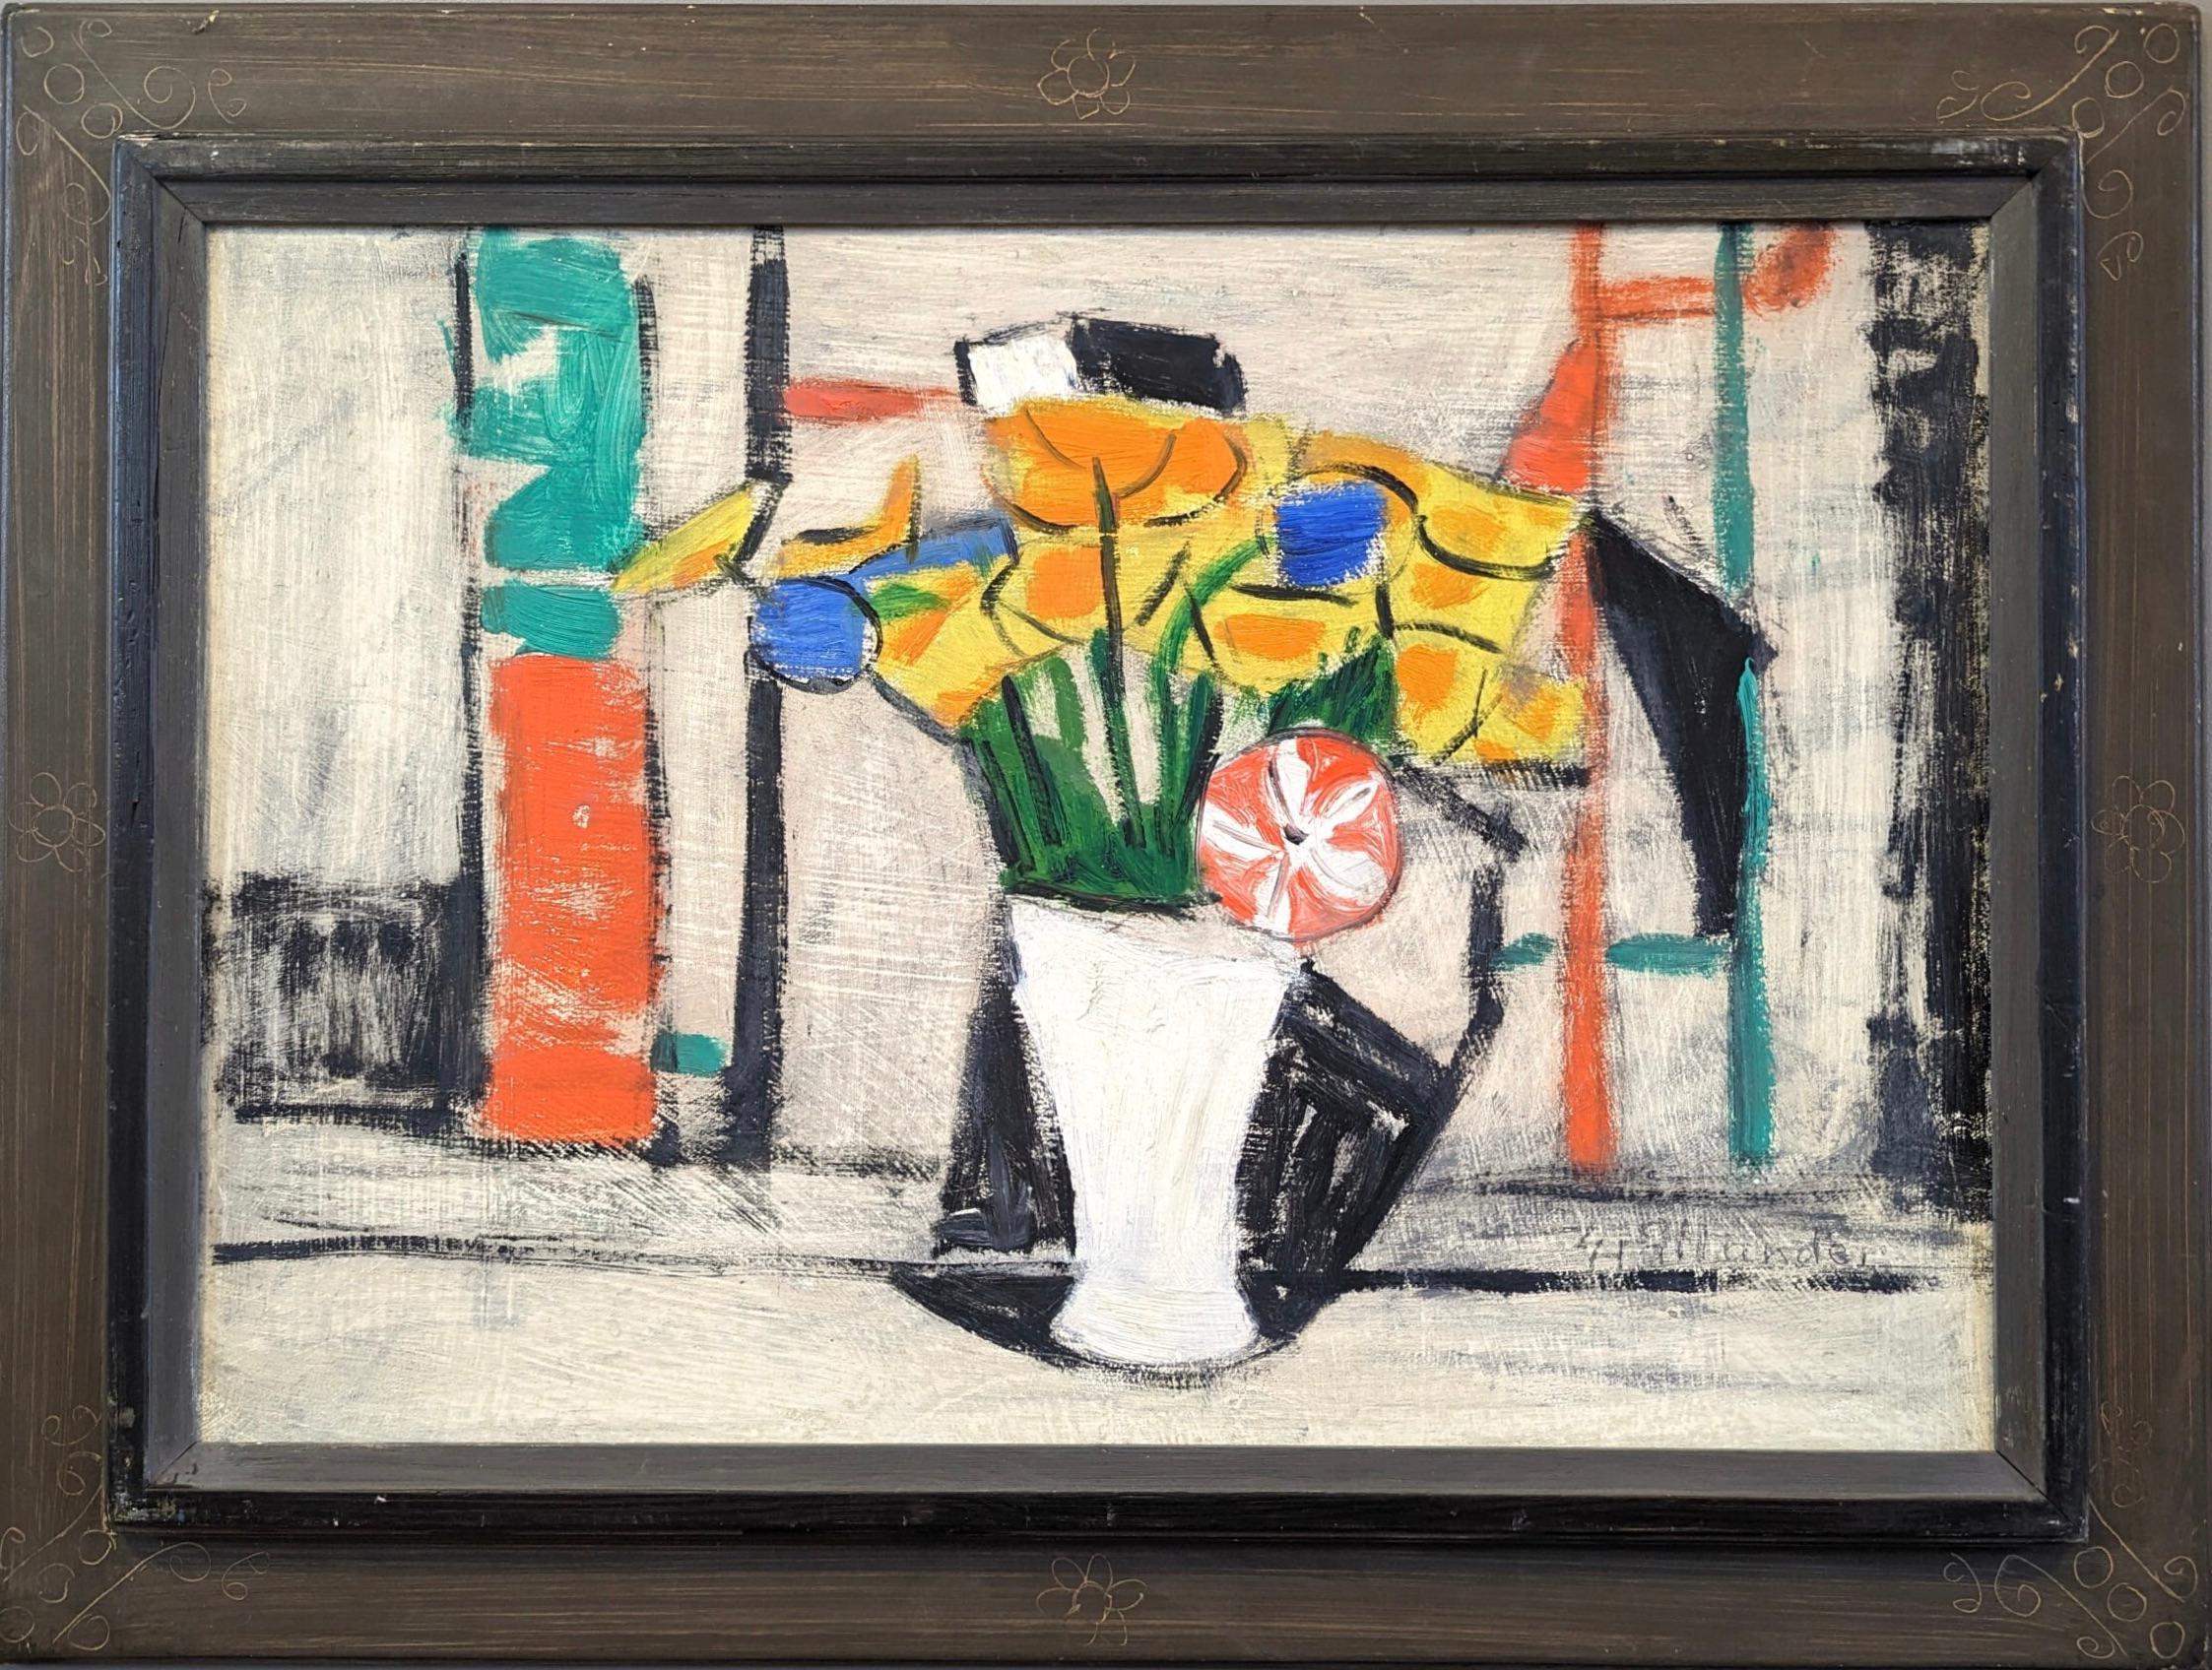 Unknown Still-Life Painting - 1964 Vintage Mid-Century Modern Swedish Still Life Oil Painting - The Bouquet